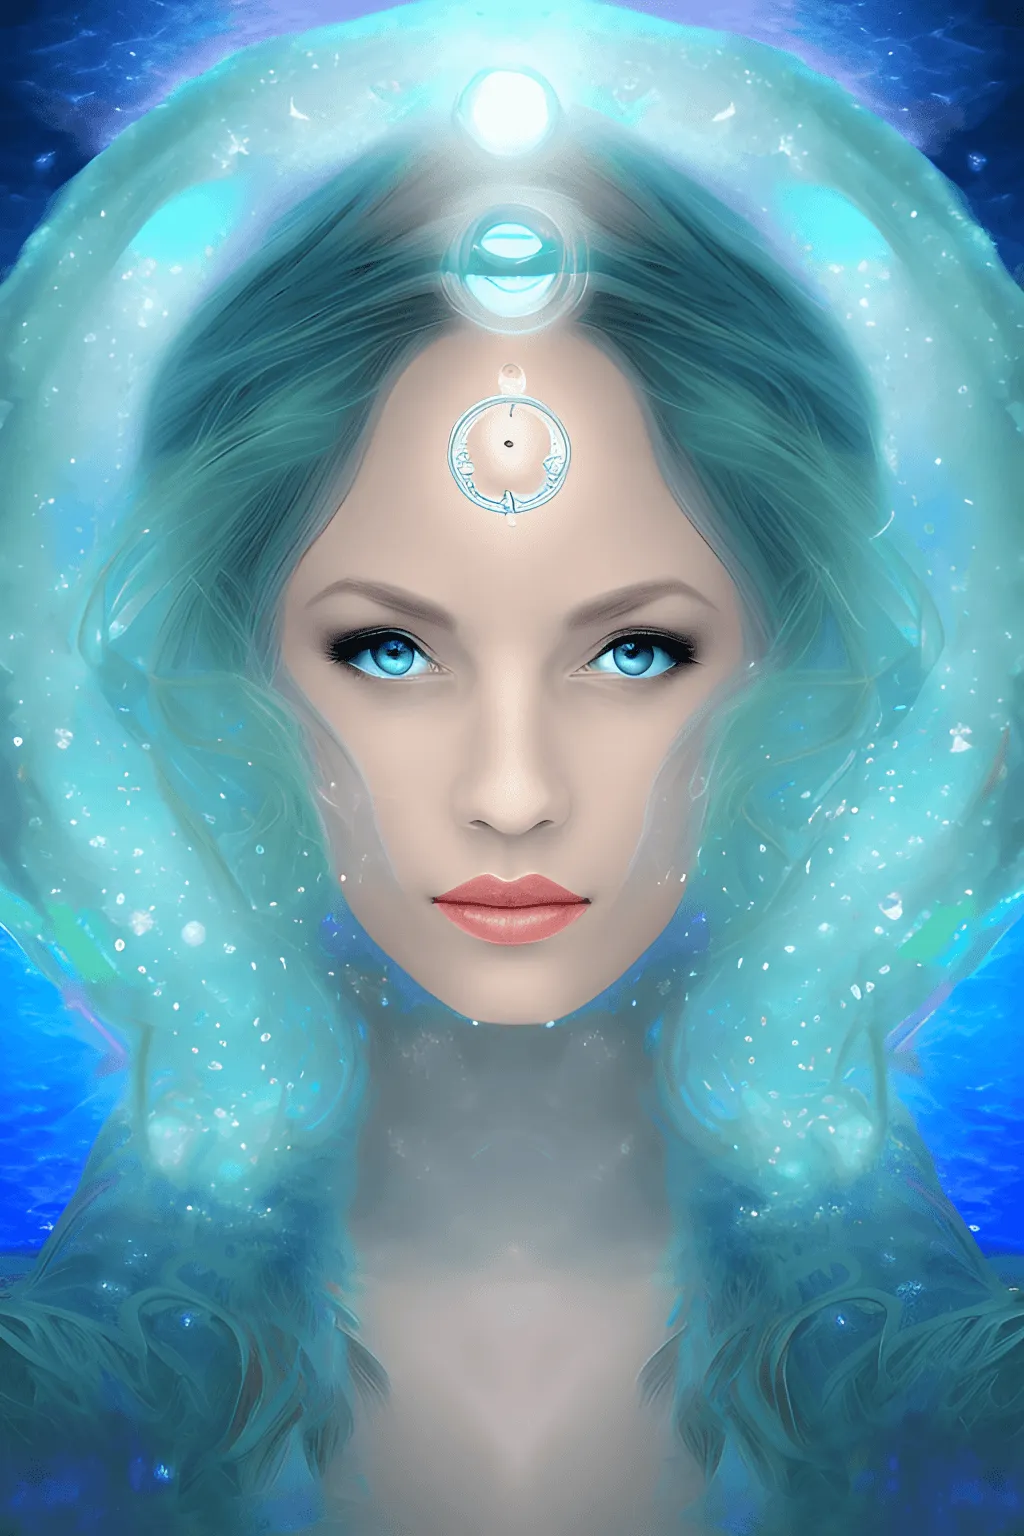 4 Zodiac Signs to Avoid for Pisces Women